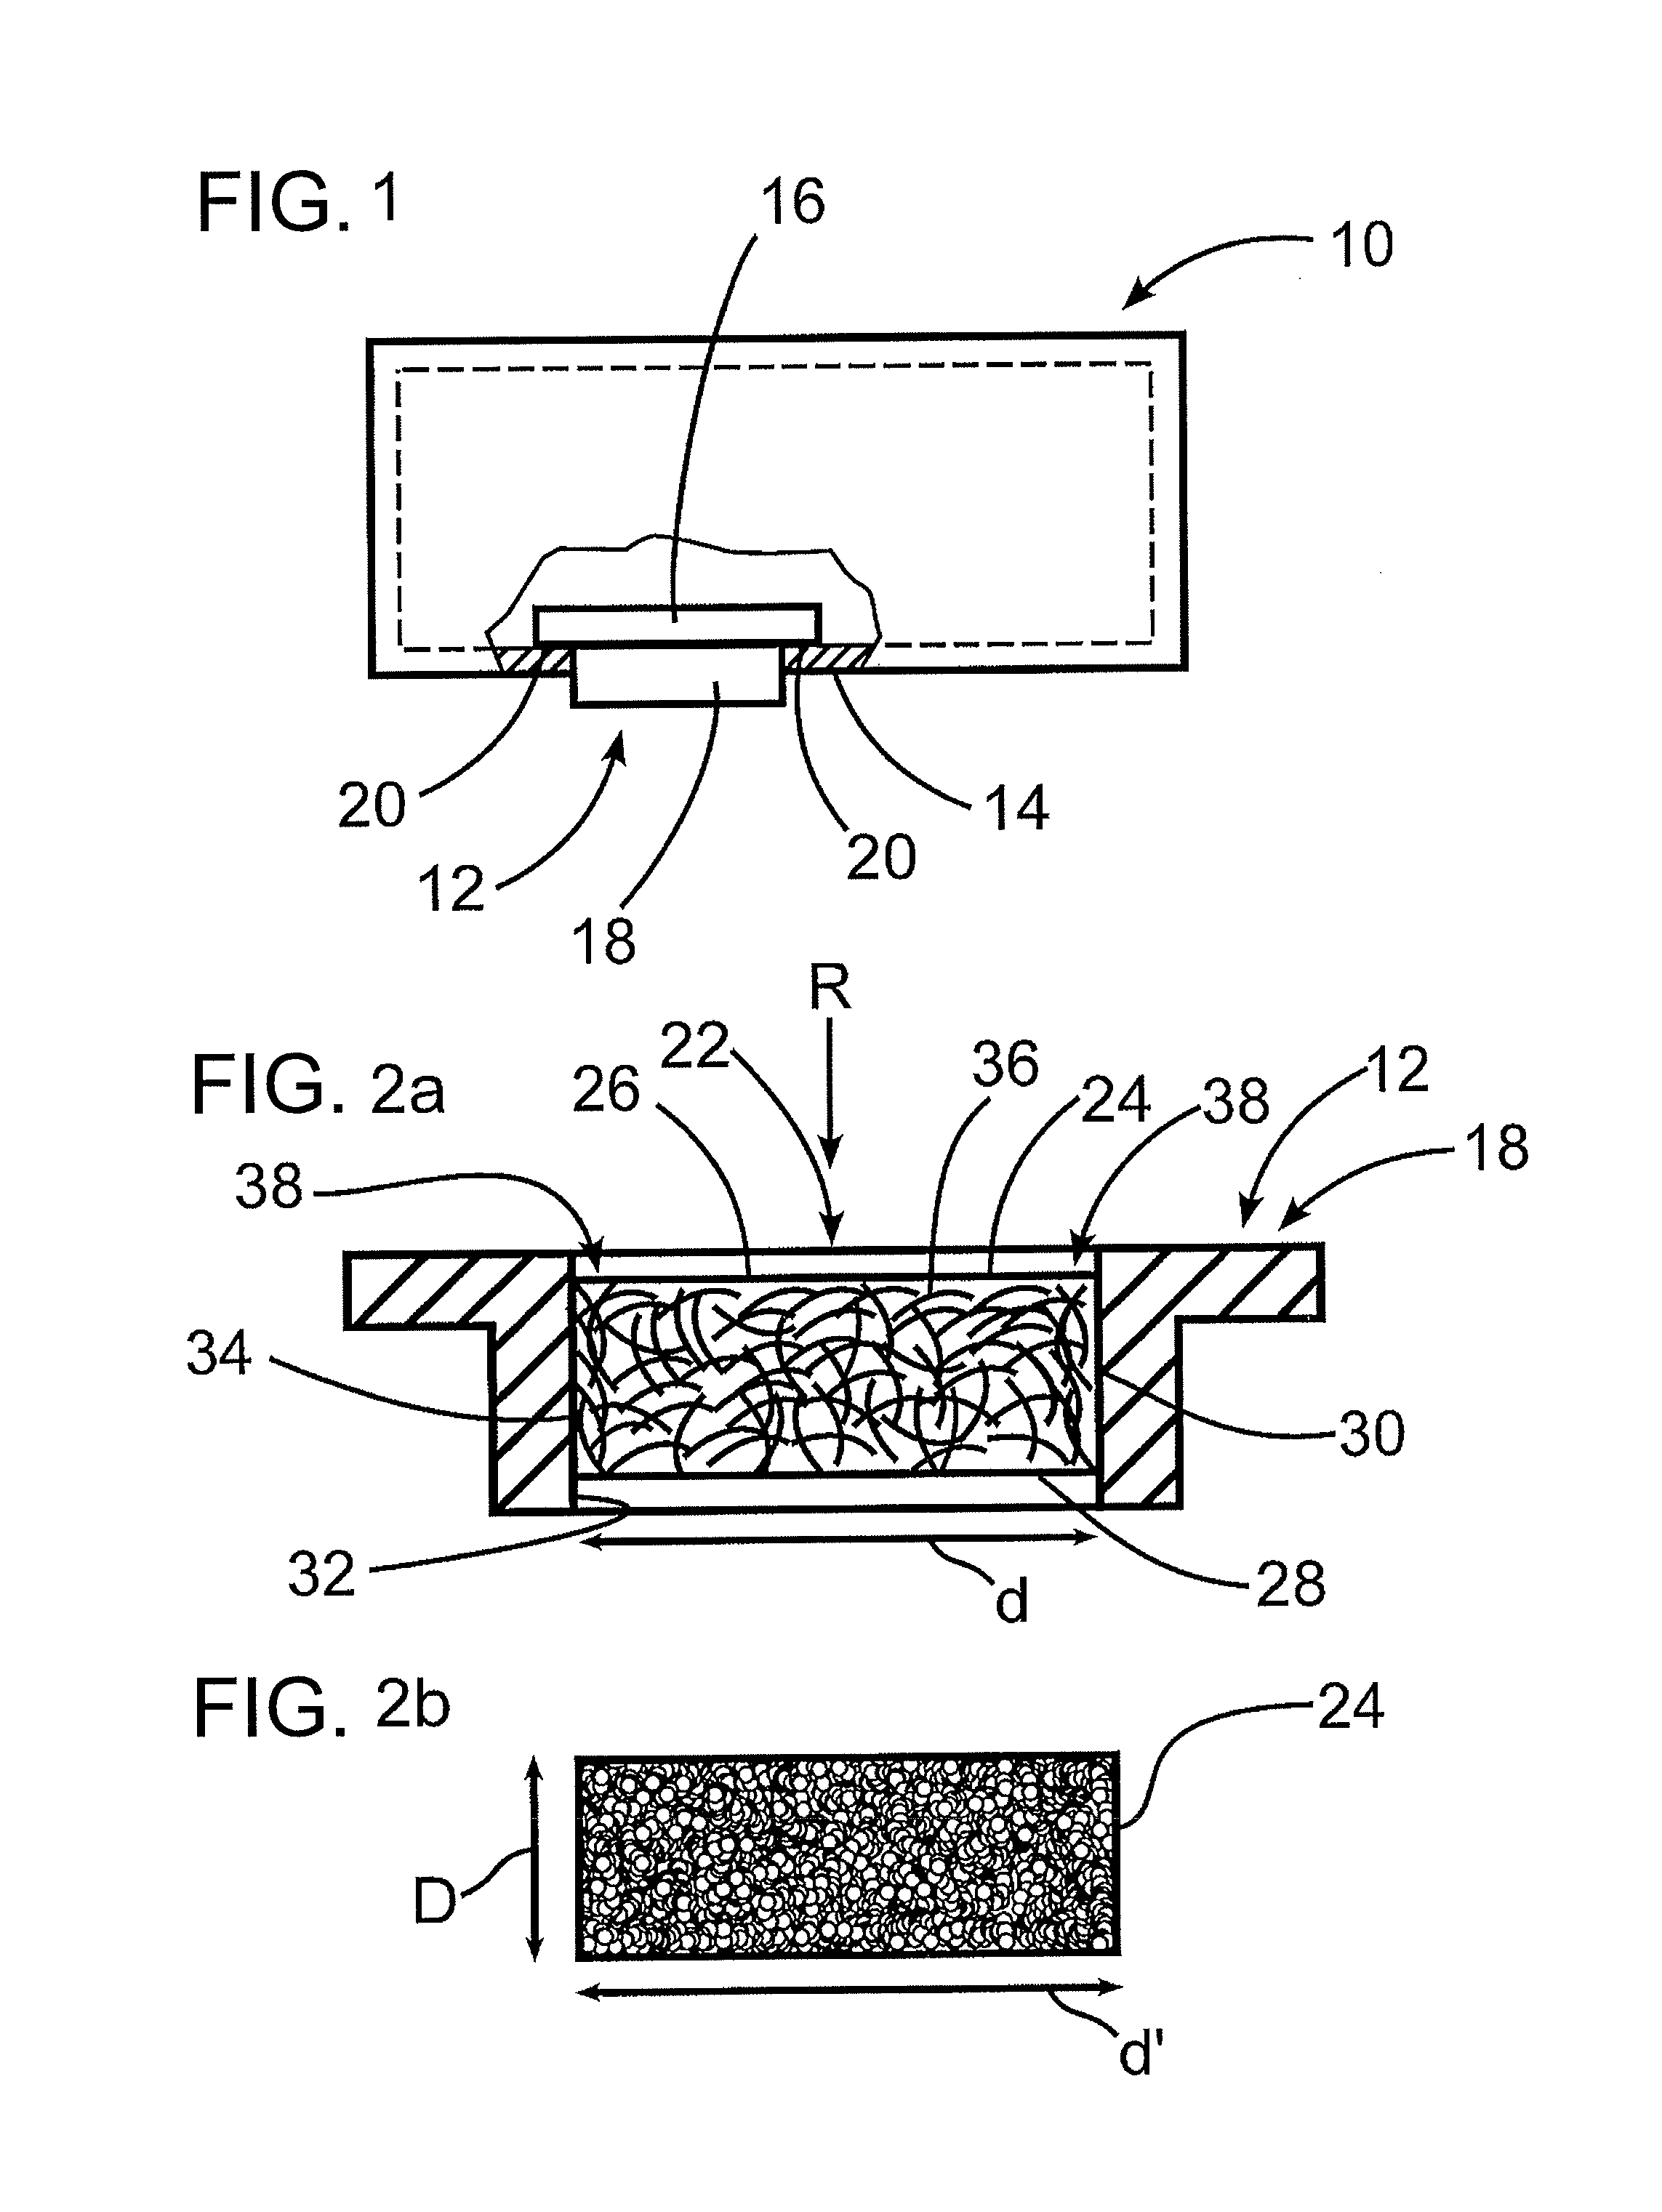 Pressure release device for housings with flameproof encapsulation with porous body having interference fit